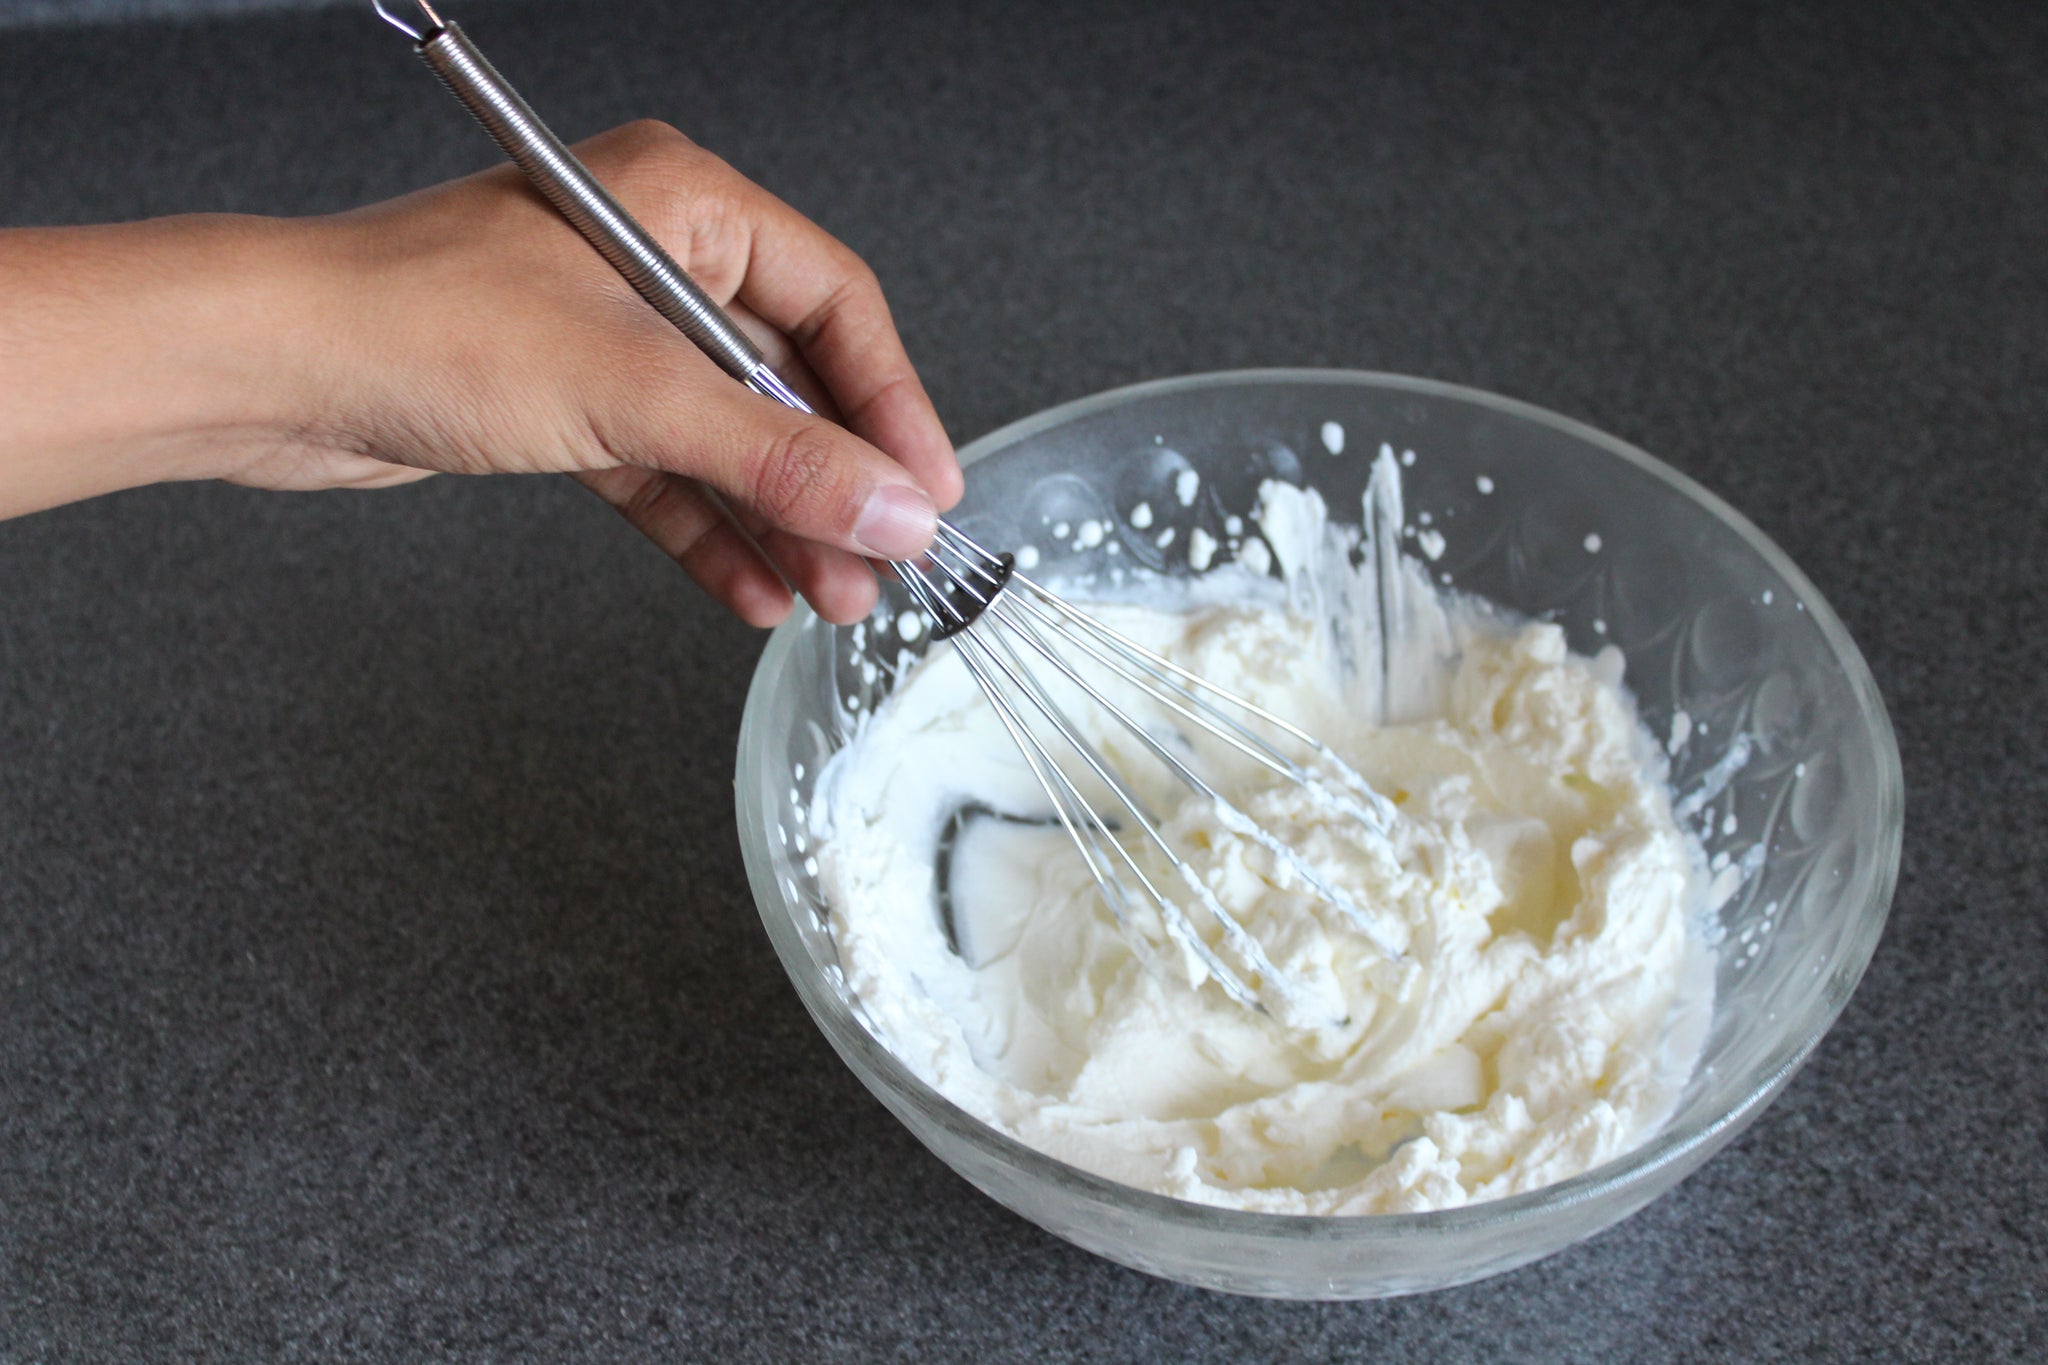 Whisk until smooth